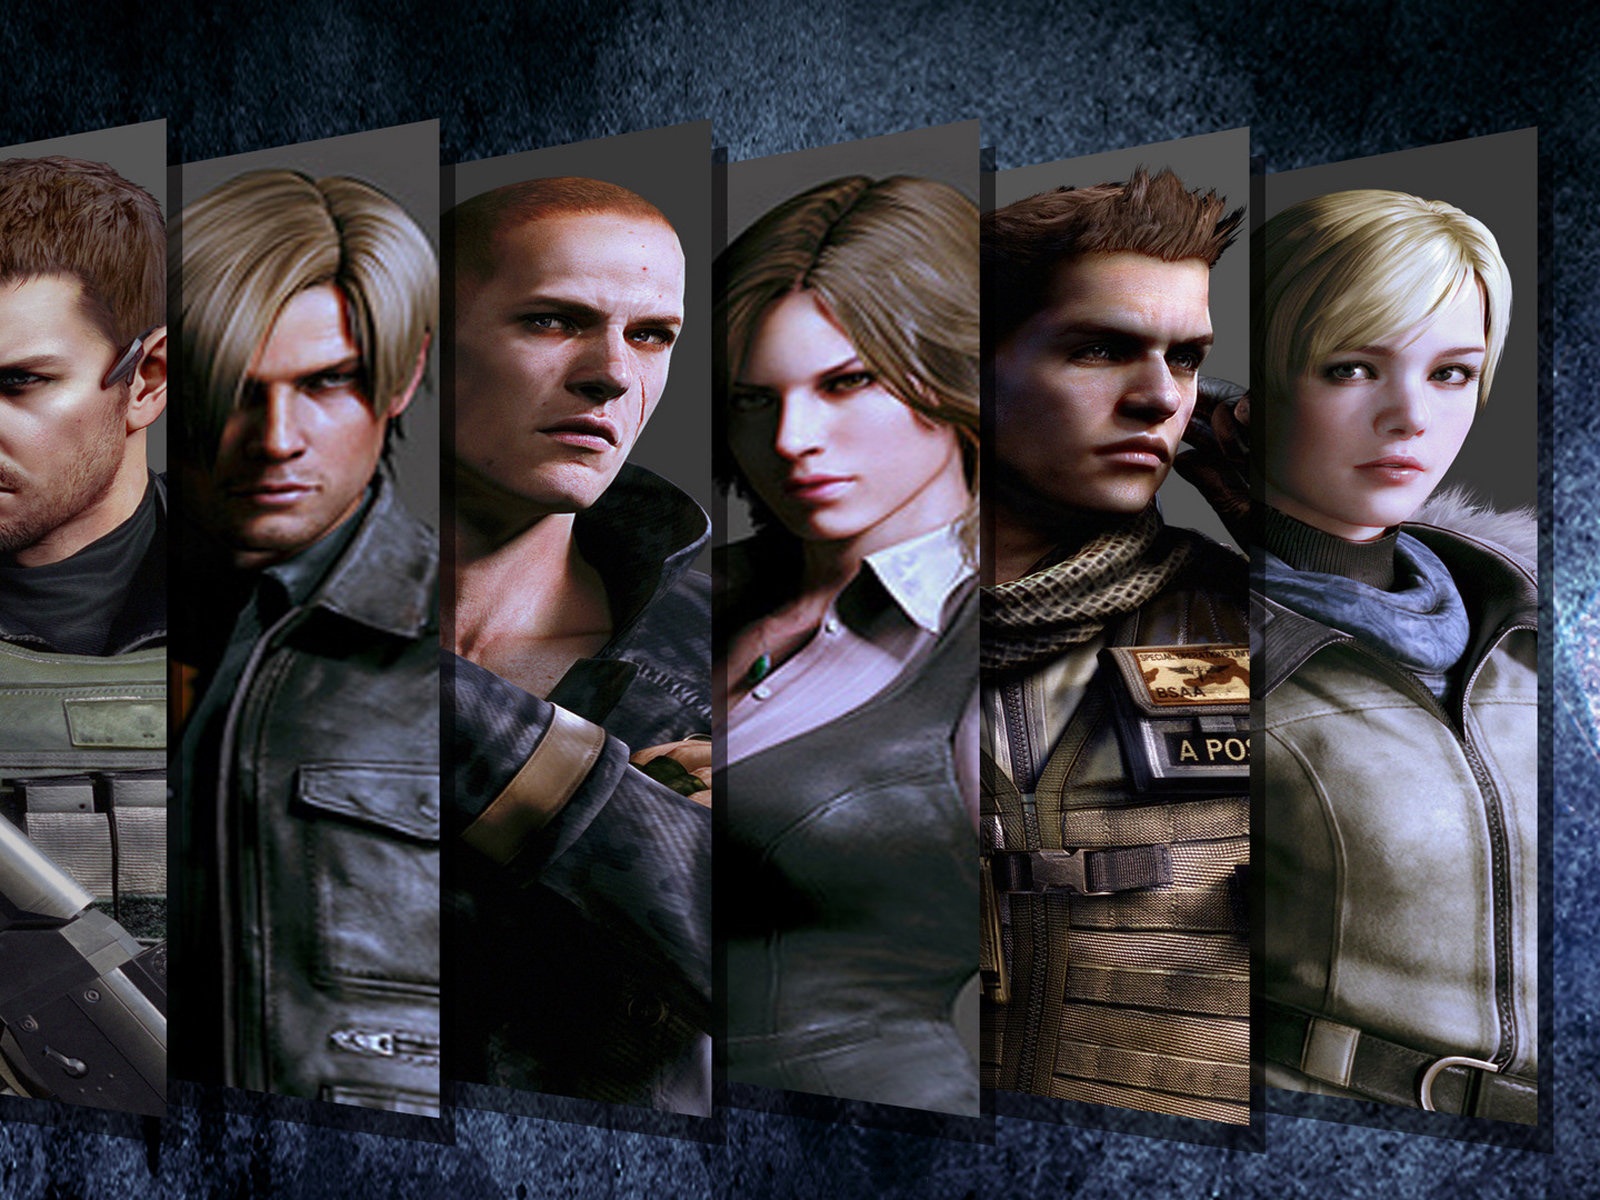 Resident Evil 6 HD game wallpapers #2 - 1600x1200